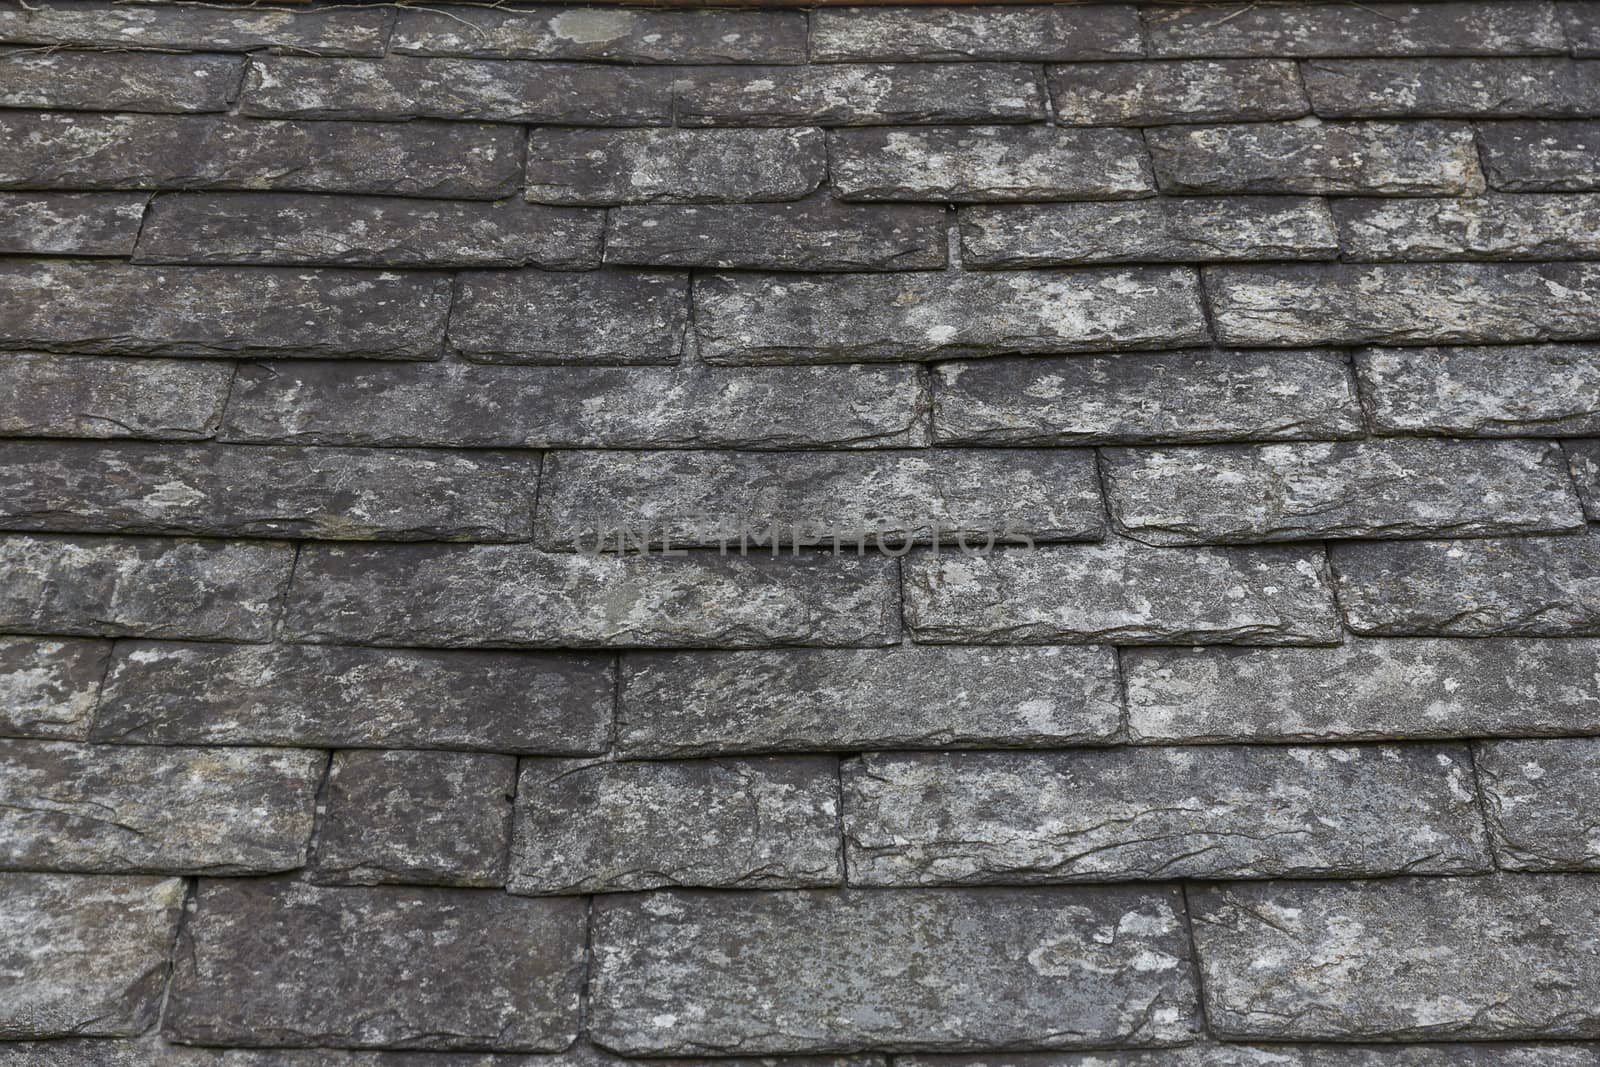 Grey slate roof background image by magicbones